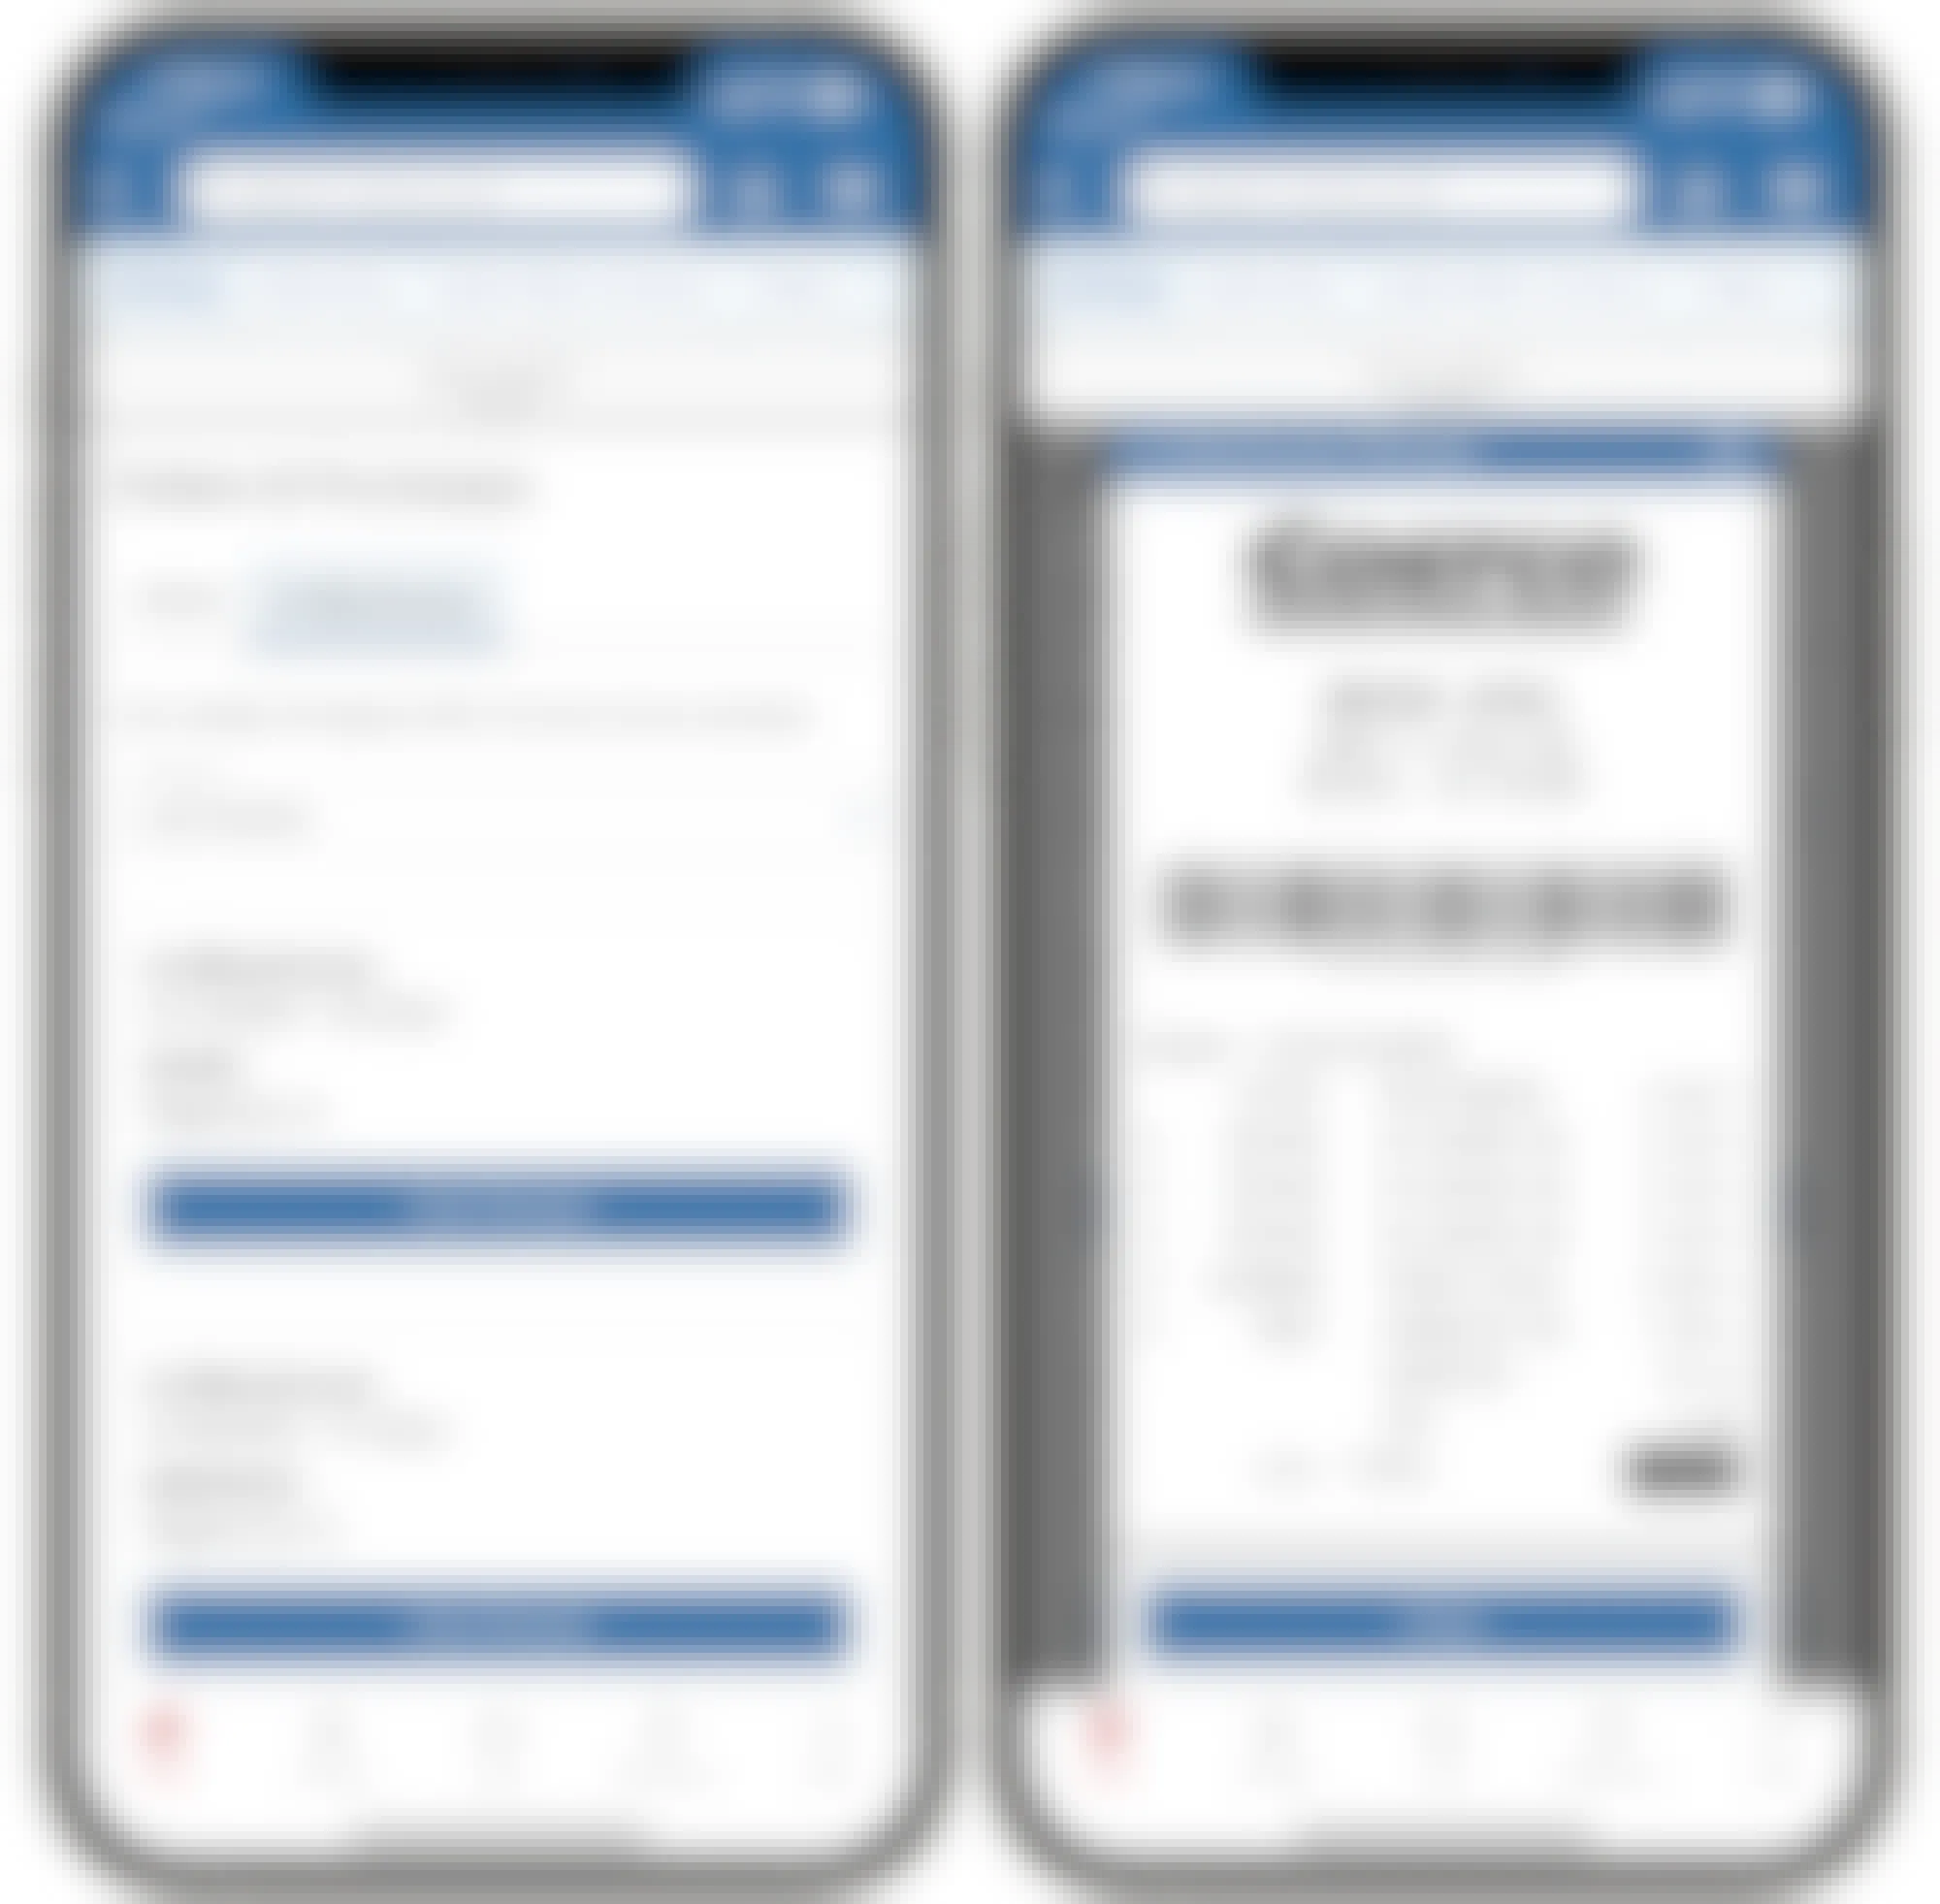 A graphic of two cell phones showing receipts on the Costco App.